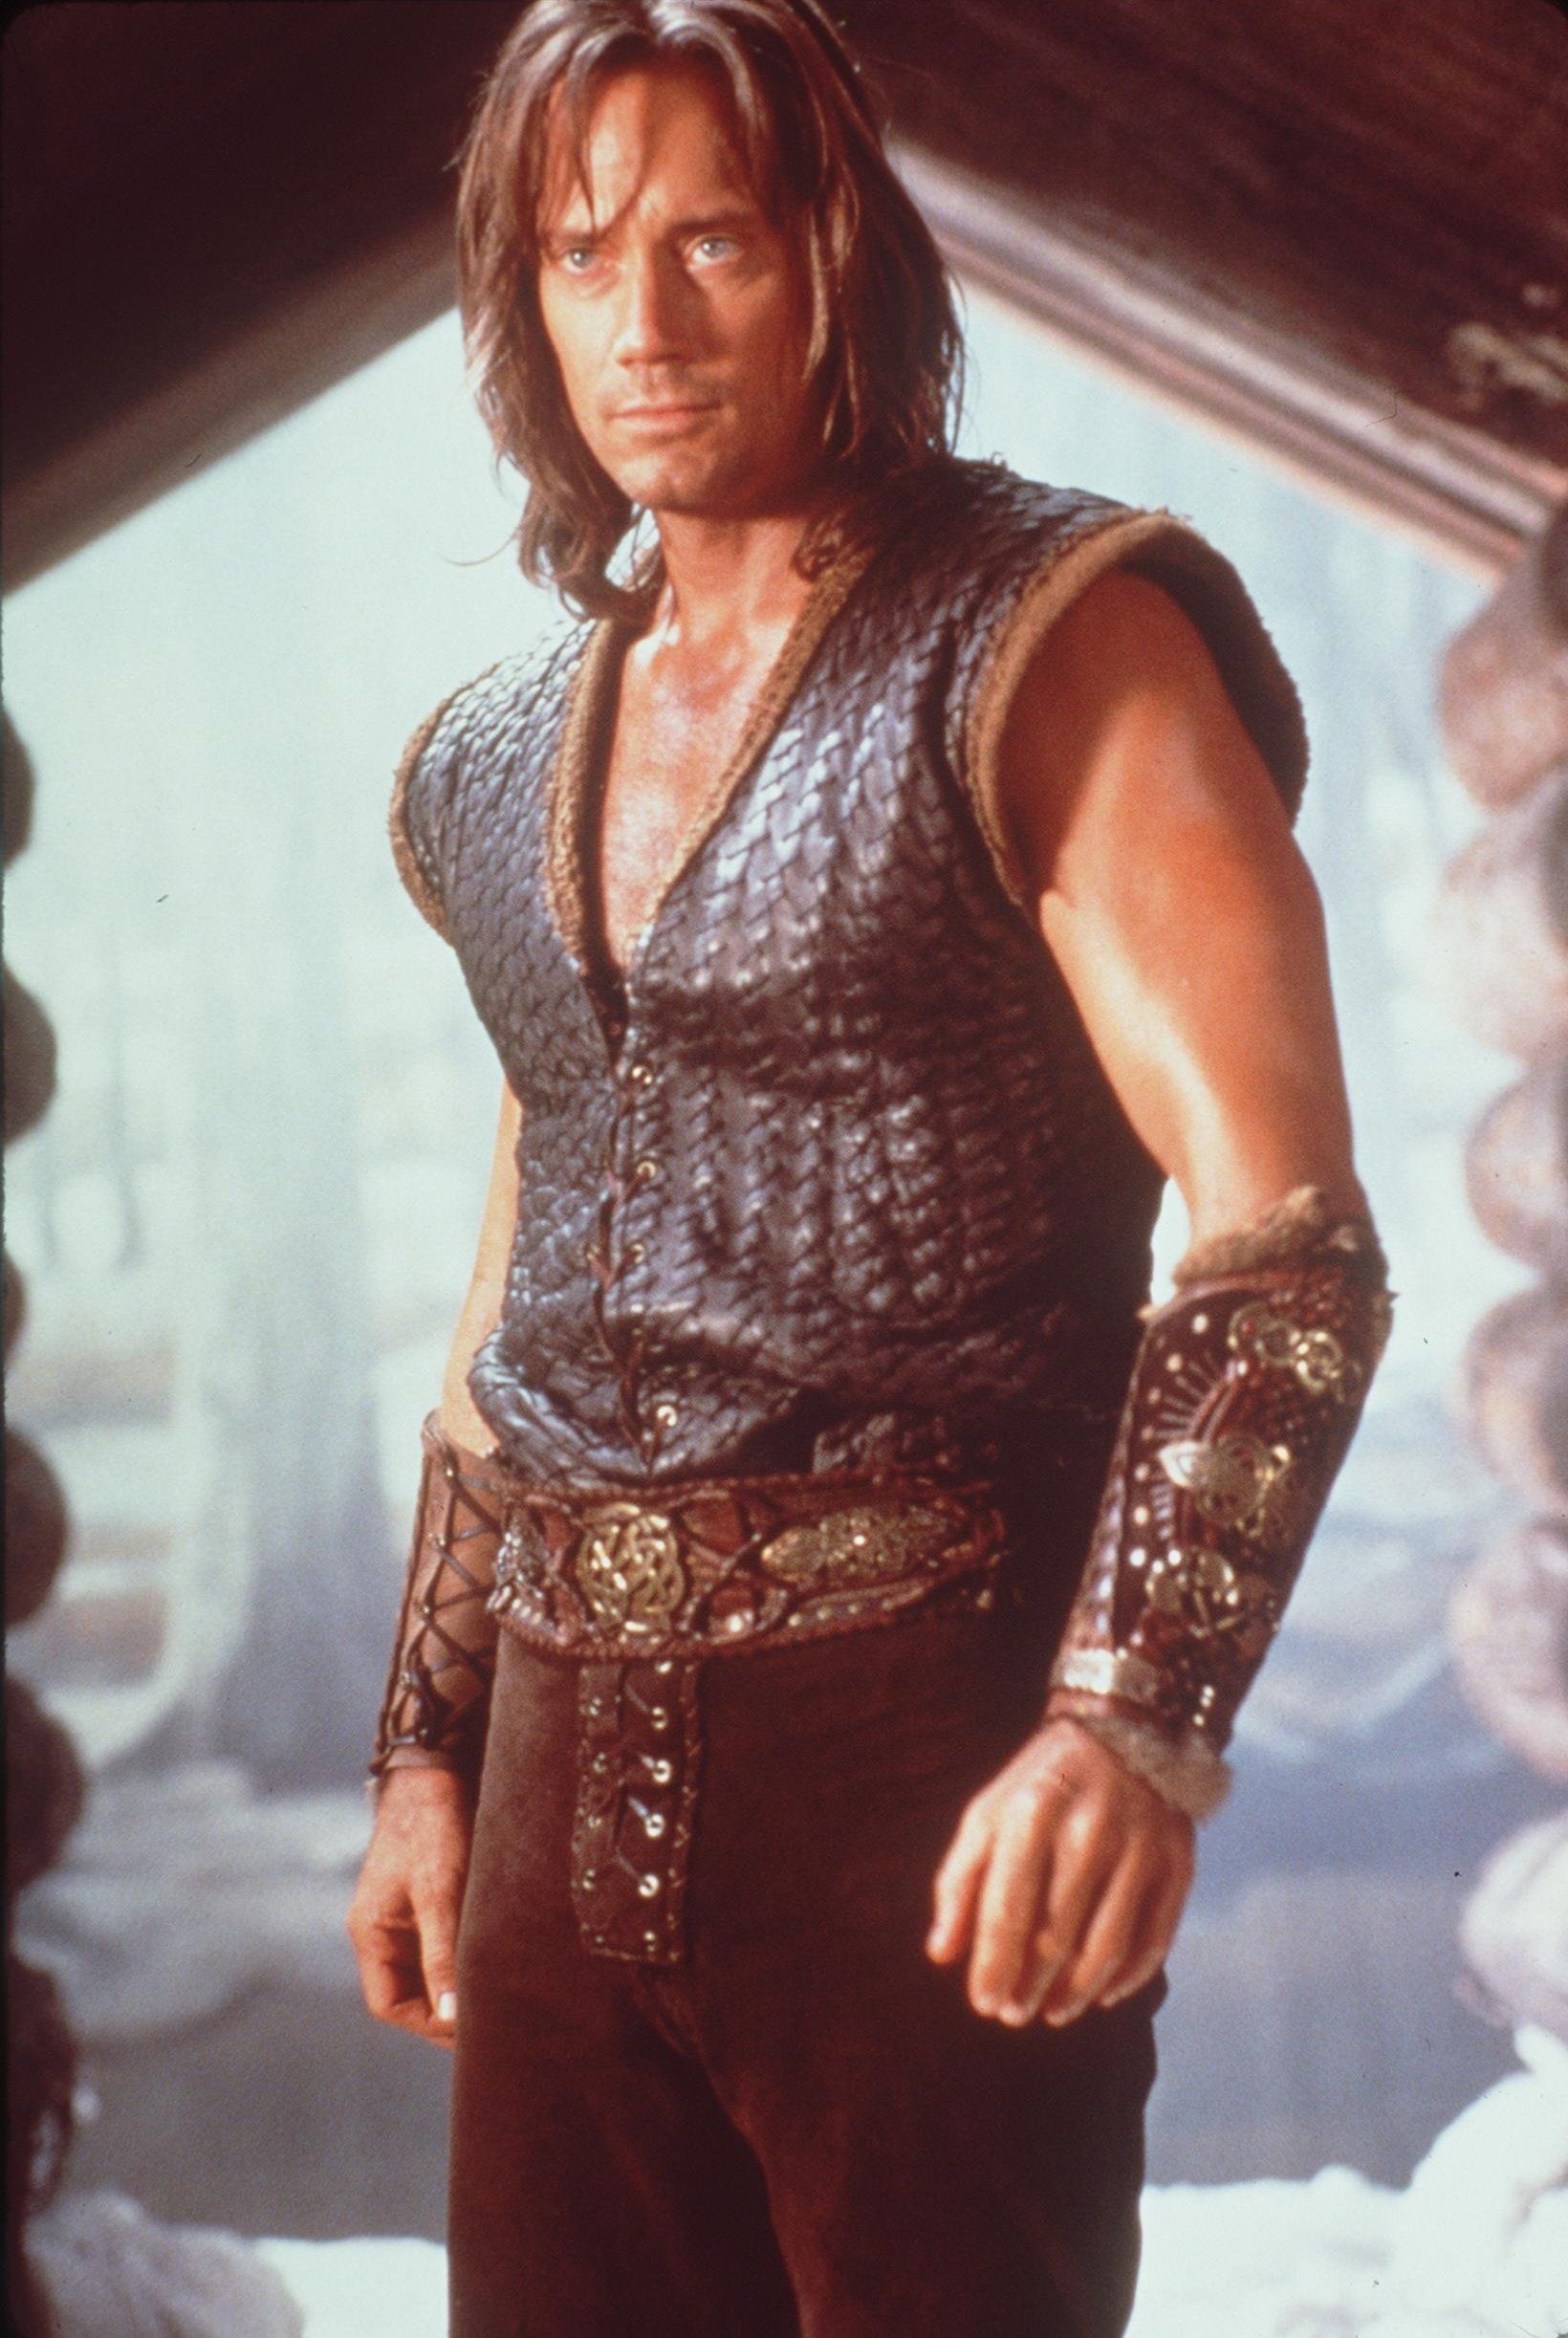 Hercules: The Legendary Journeys (TV Series): Kevin Sorbo, An American actor as the leading character. 1640x2450 HD Background.